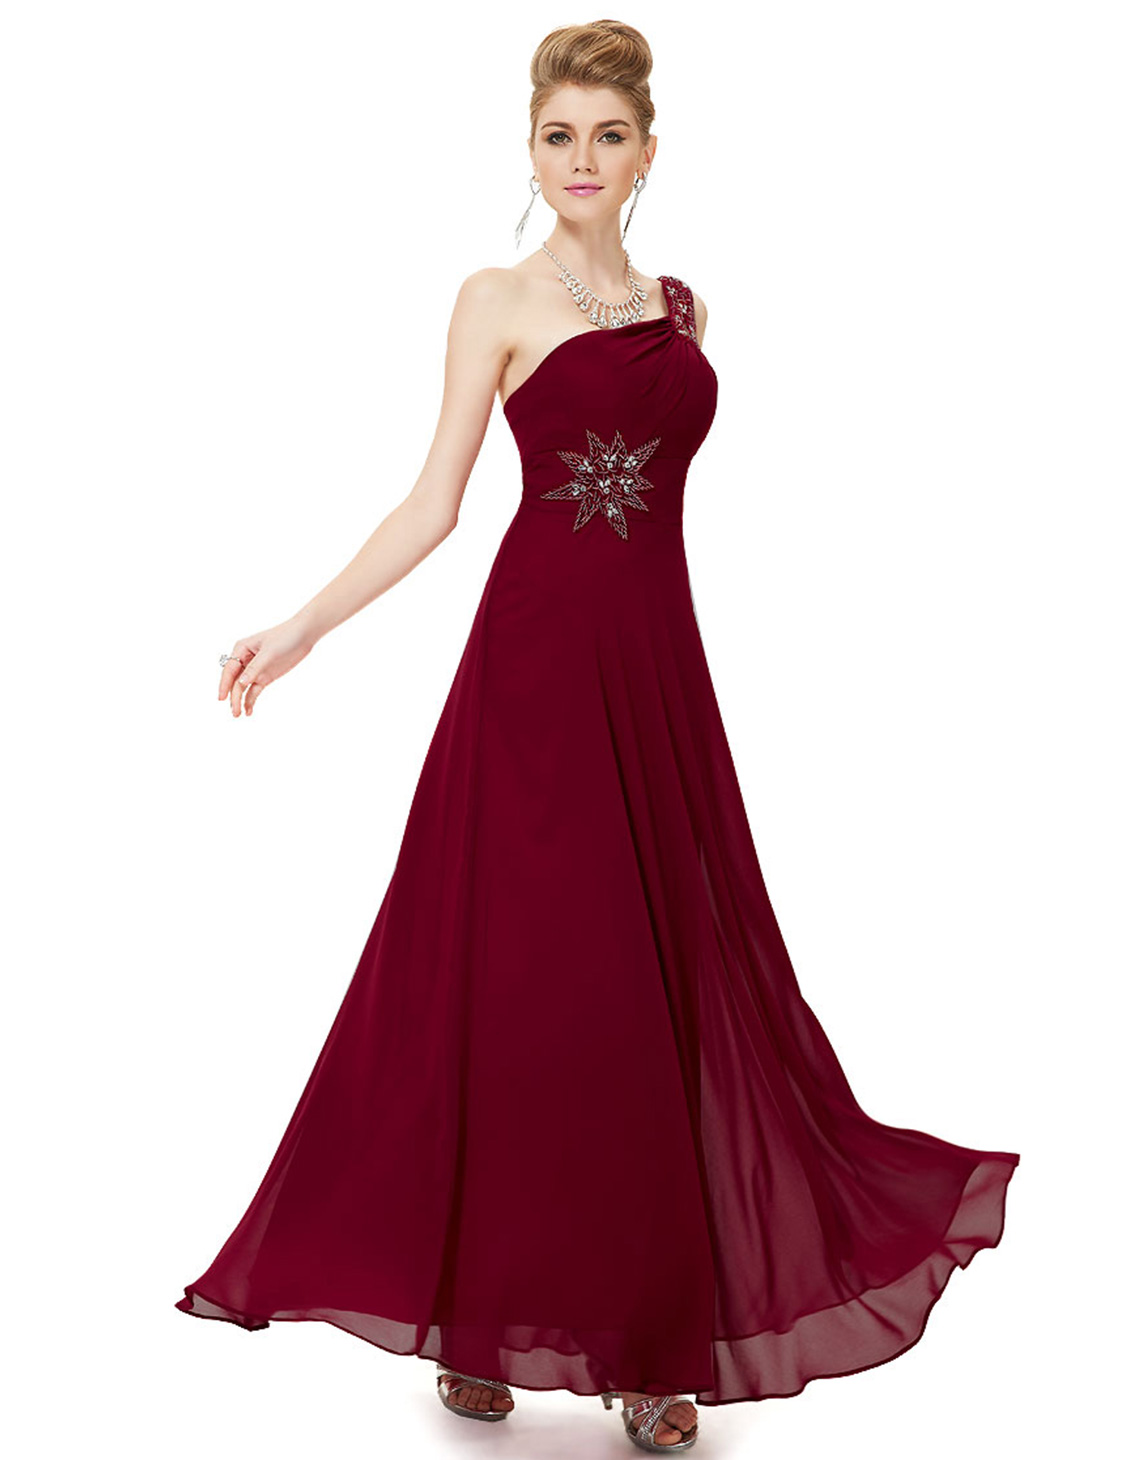 Womens One Shoulder Evening Bridesmaid Party Dresses 08079 Size 8 10 12 ...